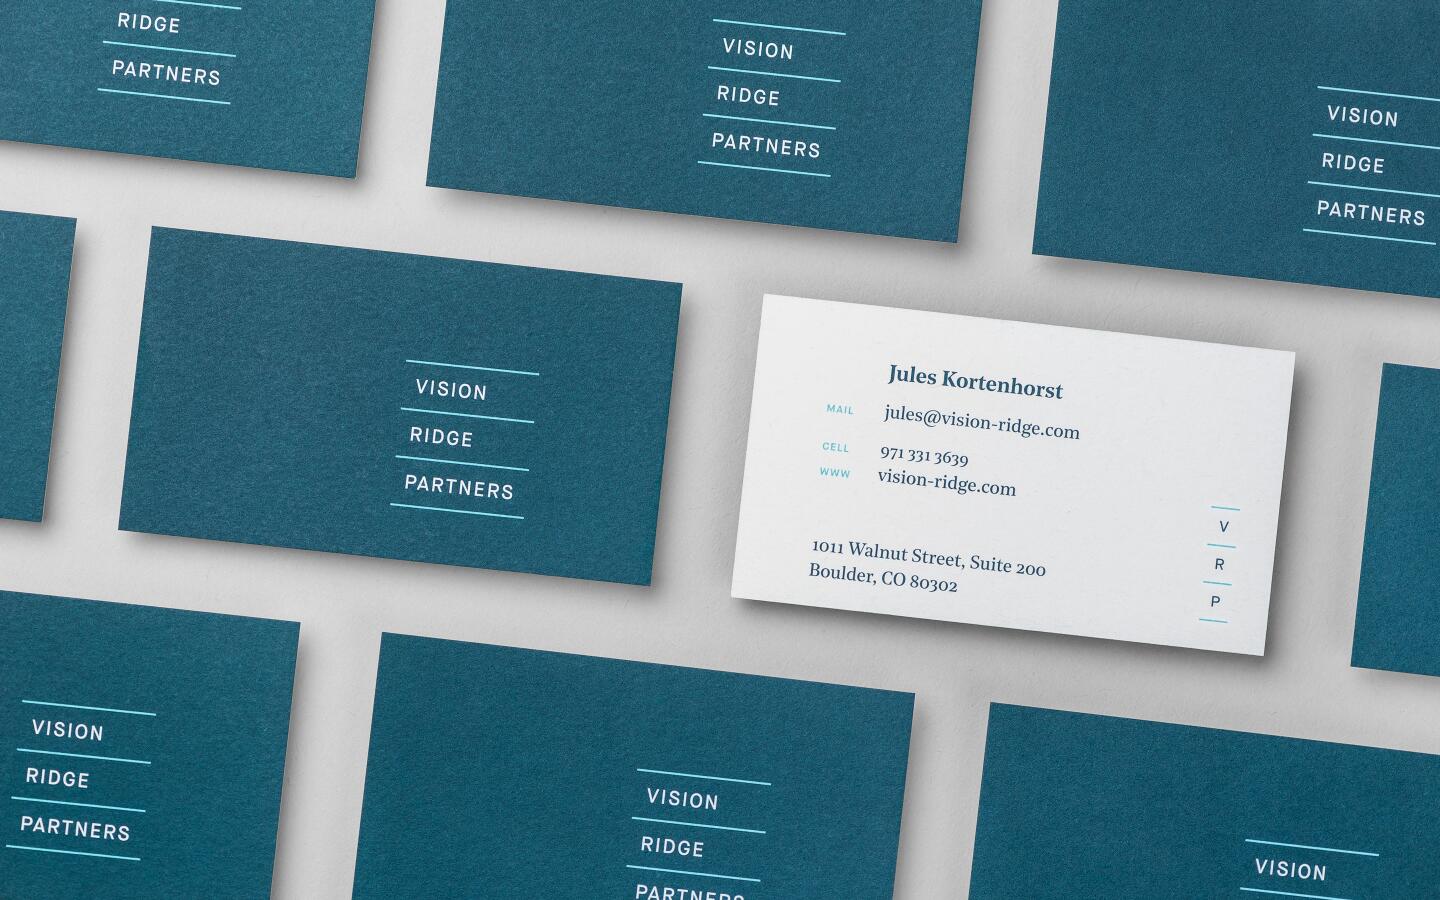 Business cards printed with eco-friendly ink